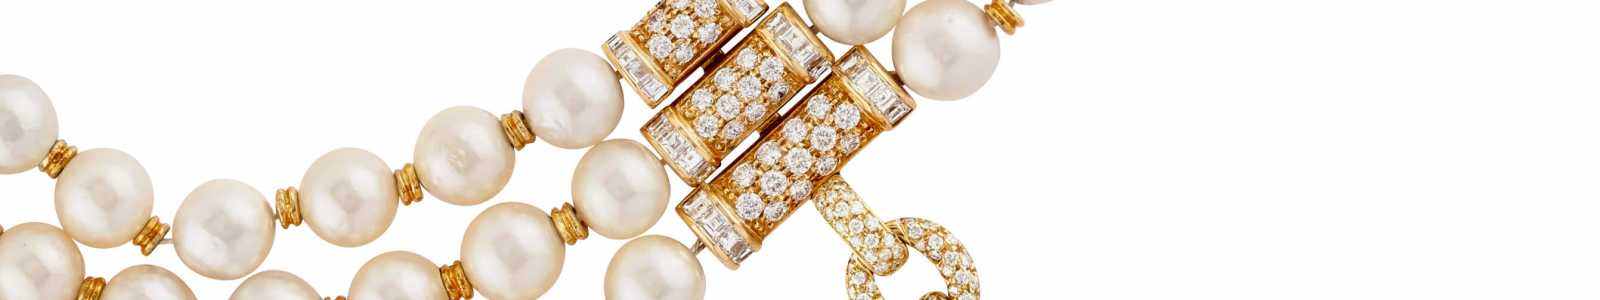 Jewels and Watches Online: La Dolce Vita